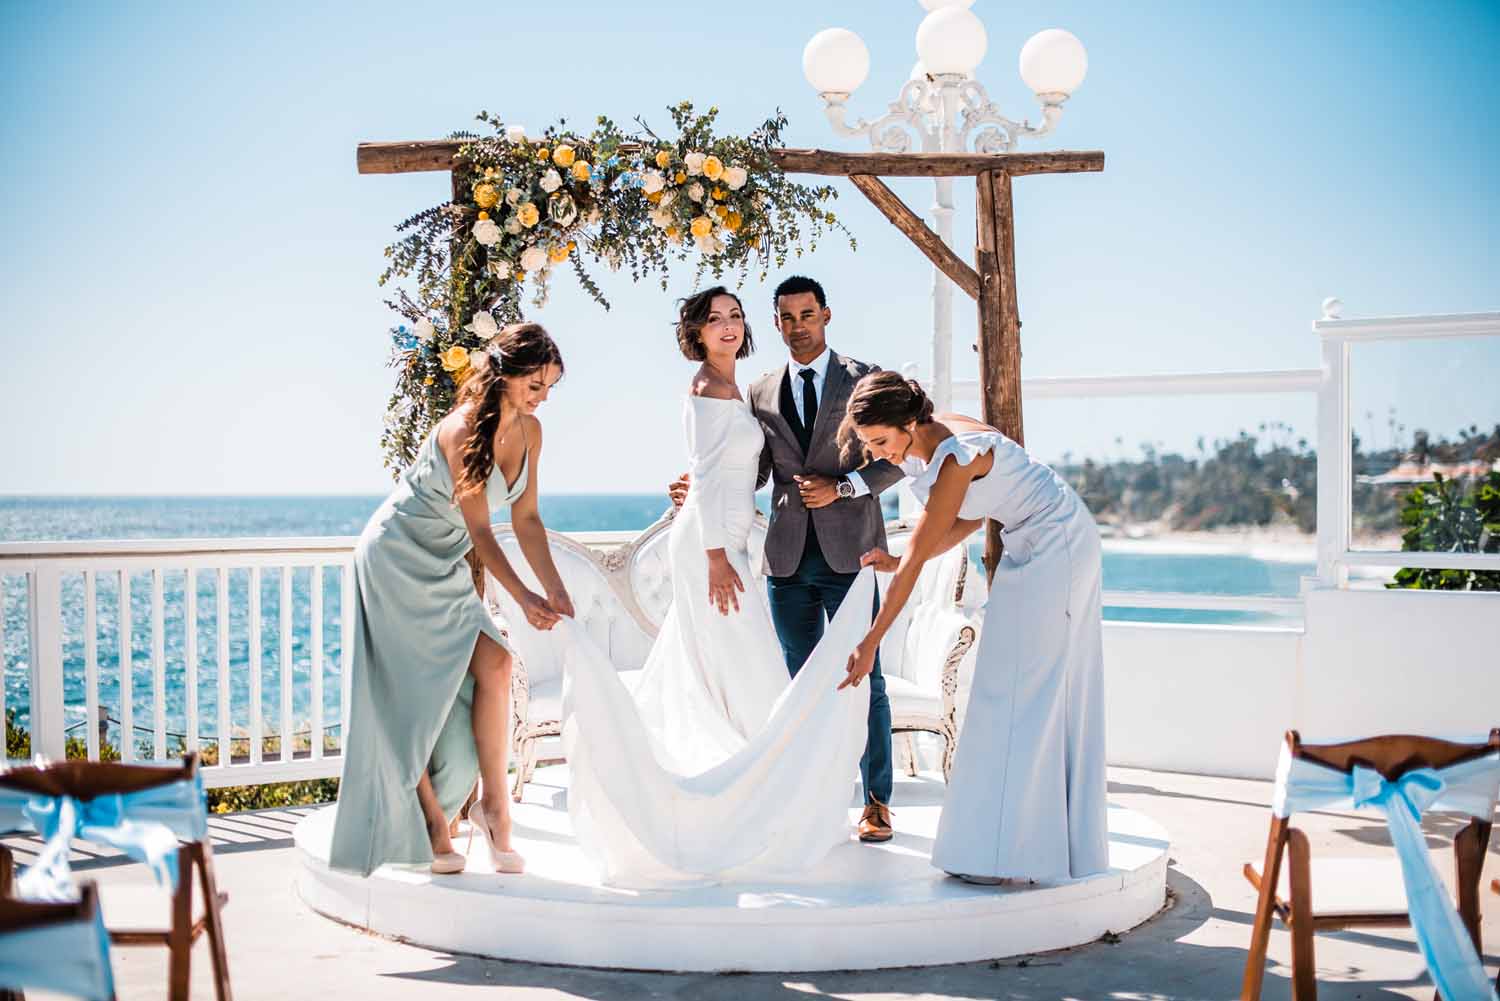 two bridesmaids fix the bride's dress while she stands at the seaside outdoor altar with her husband